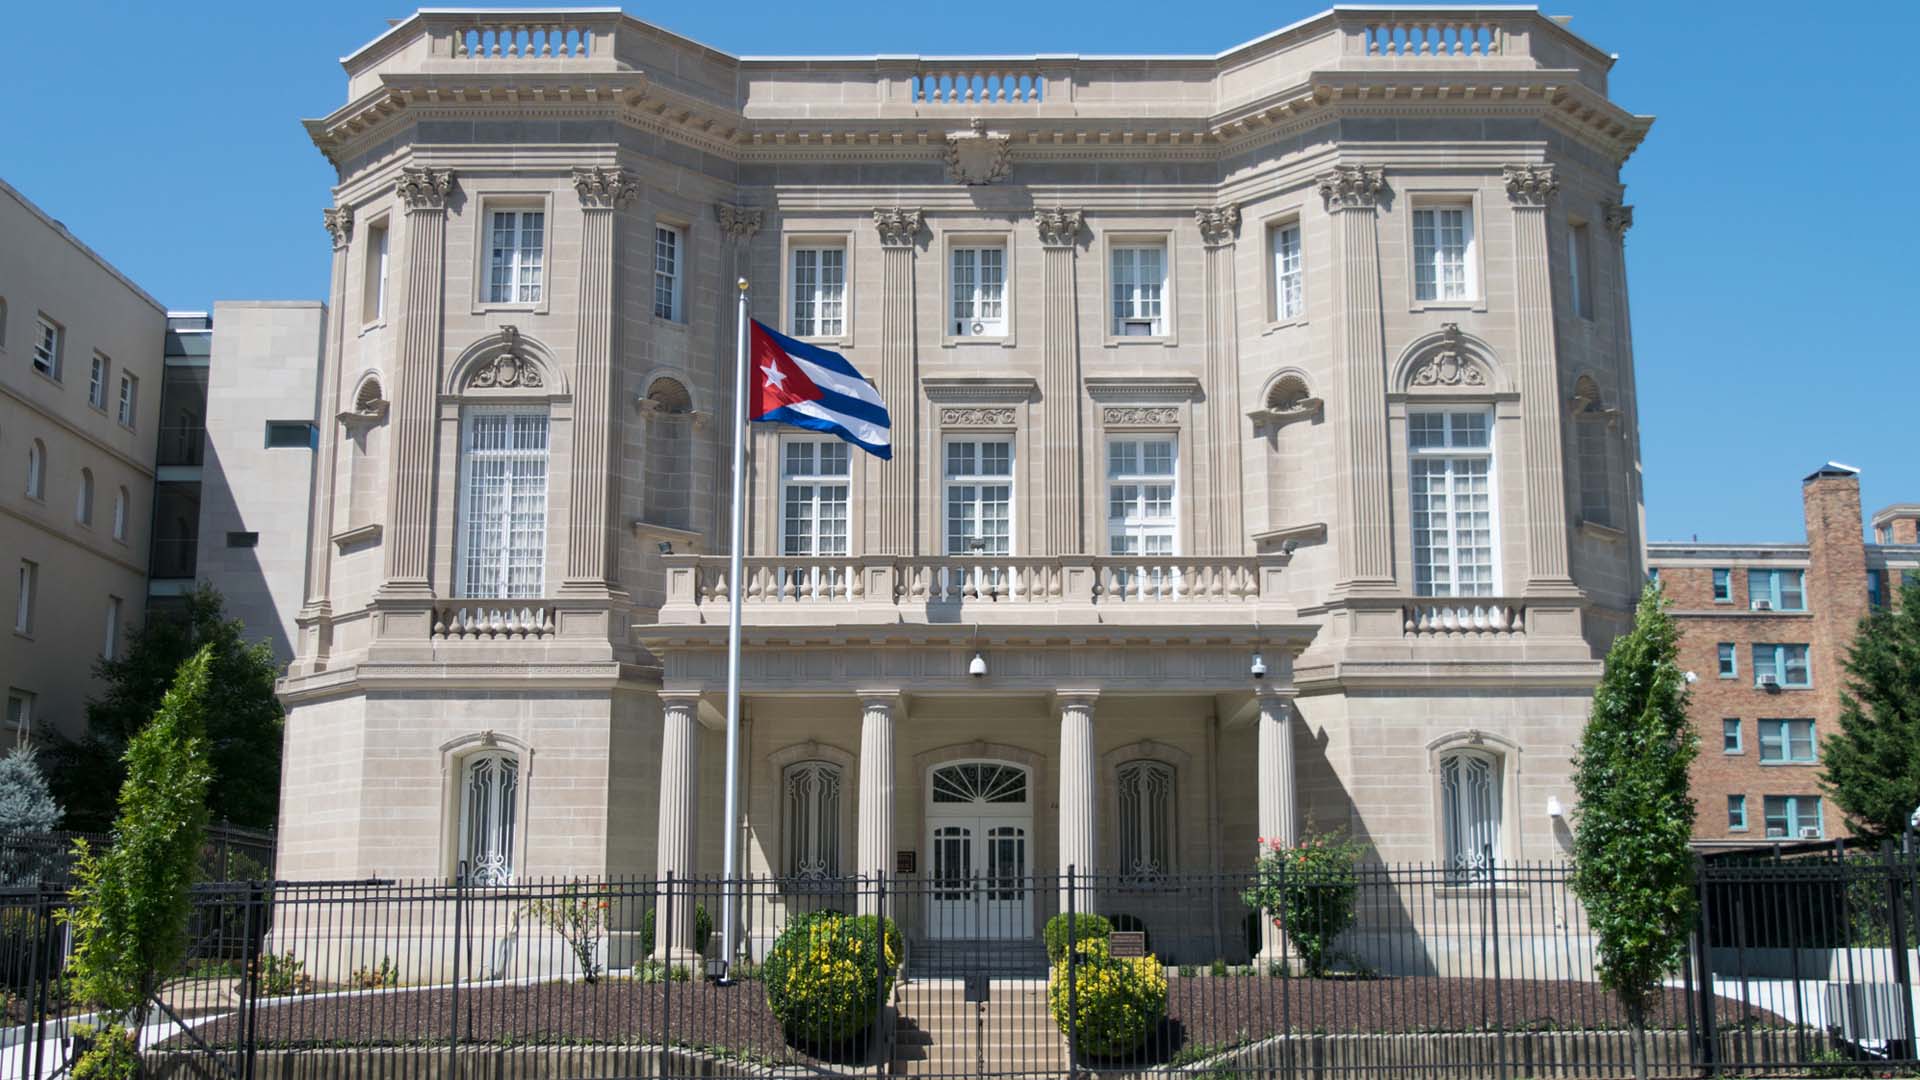 STATEMENT RE: The Acquittal of the Terrorist Who Attacked the Cuban Embassy in Washington